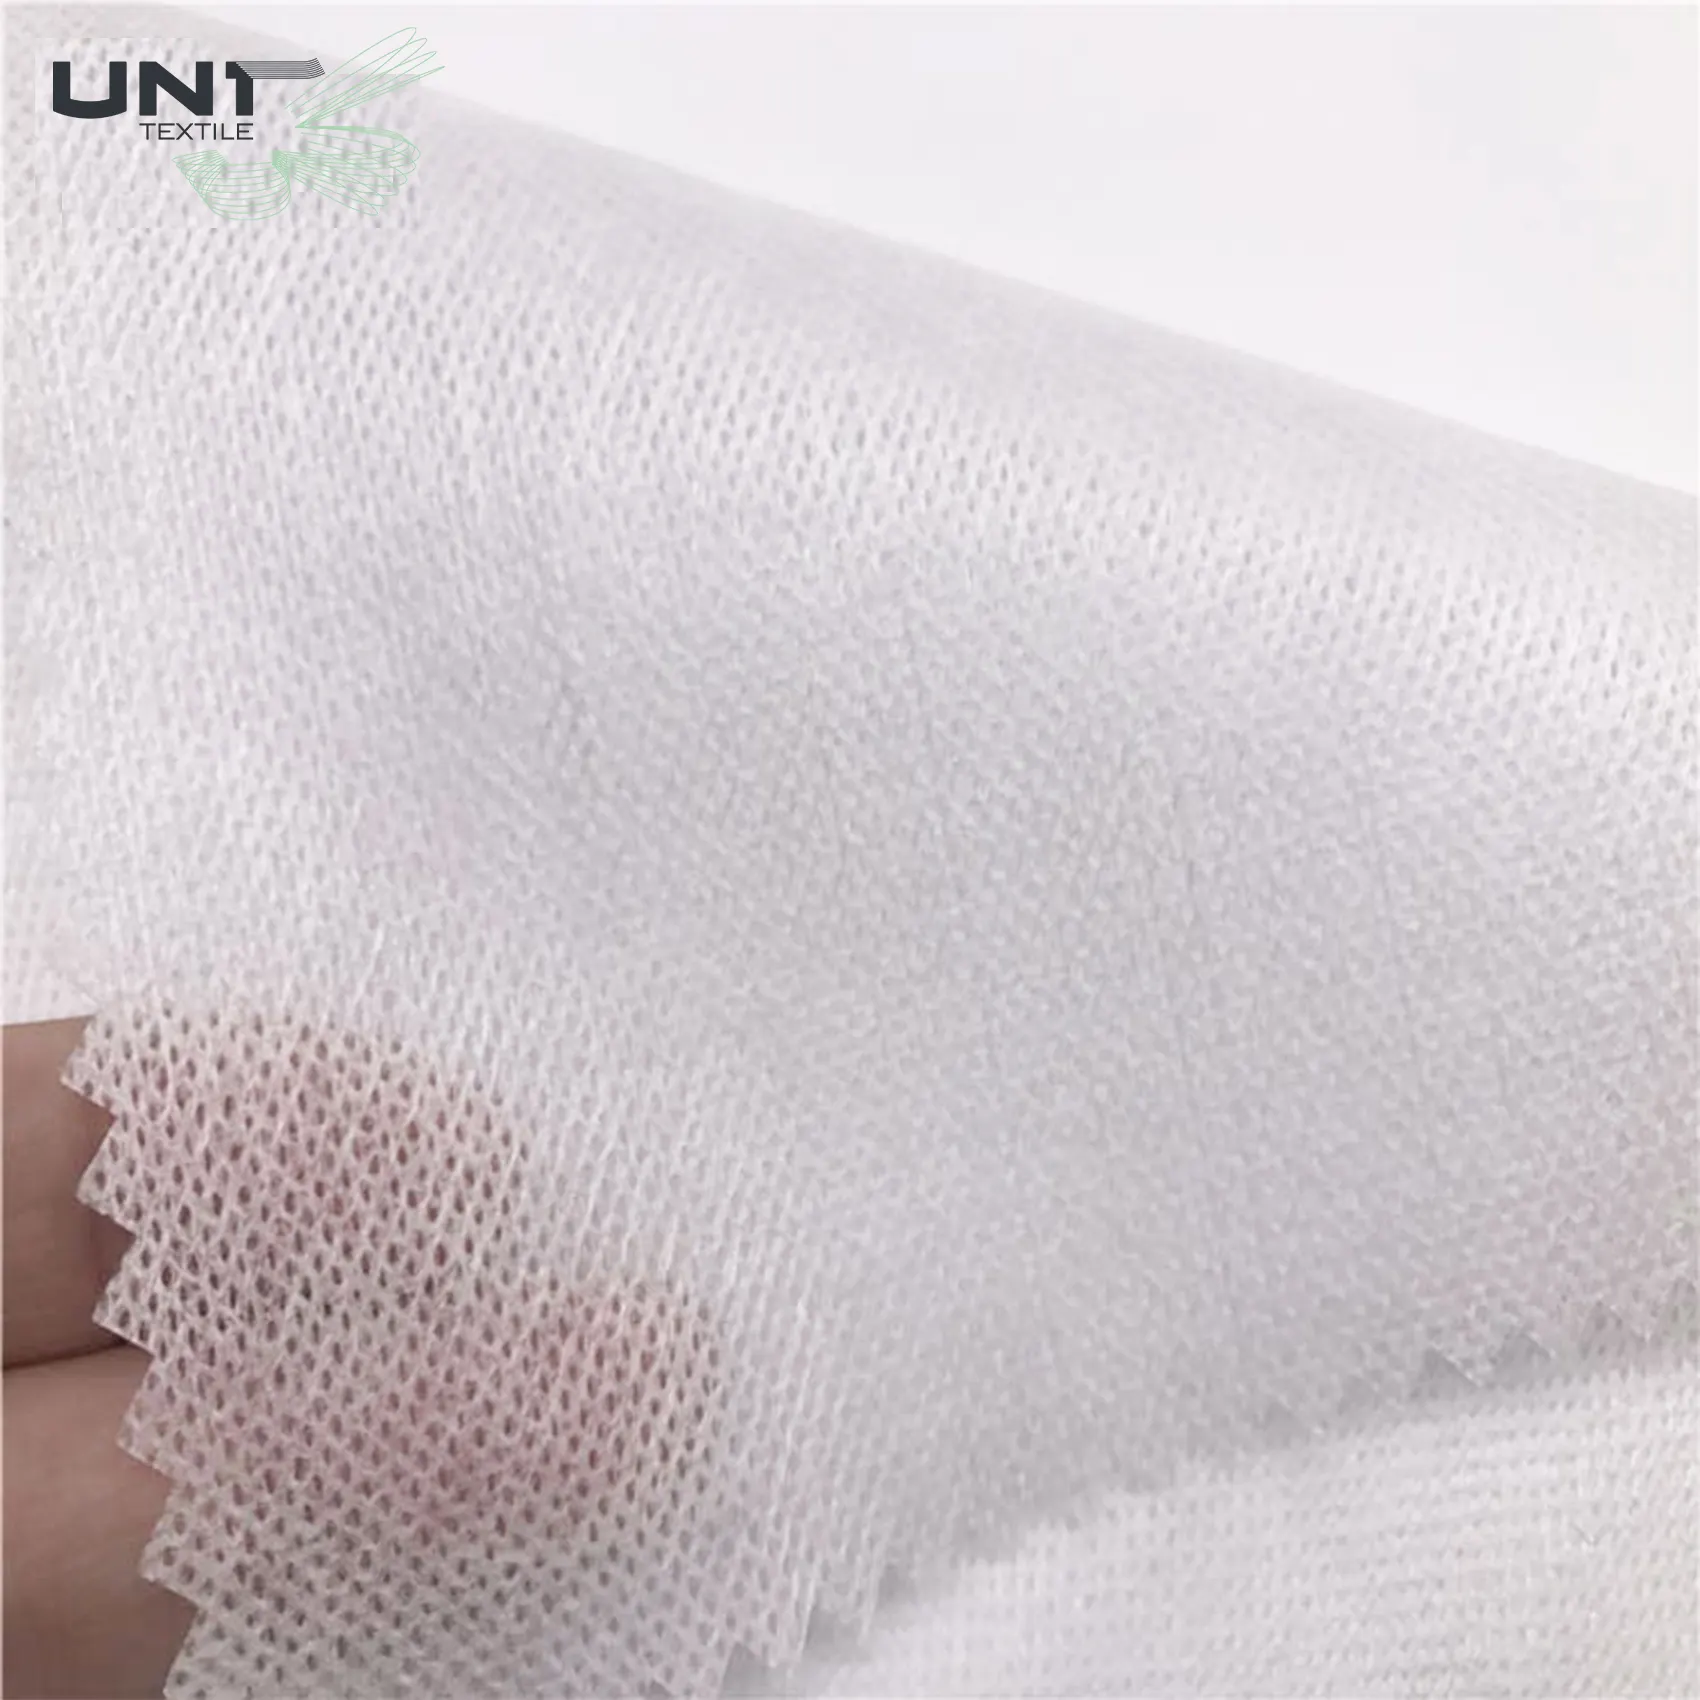 Eco-friendly Spunlace Viscose/ pet Blends Substrate Absorbent Material Mini spunlace nonwoven non woven fabric Roll Towel